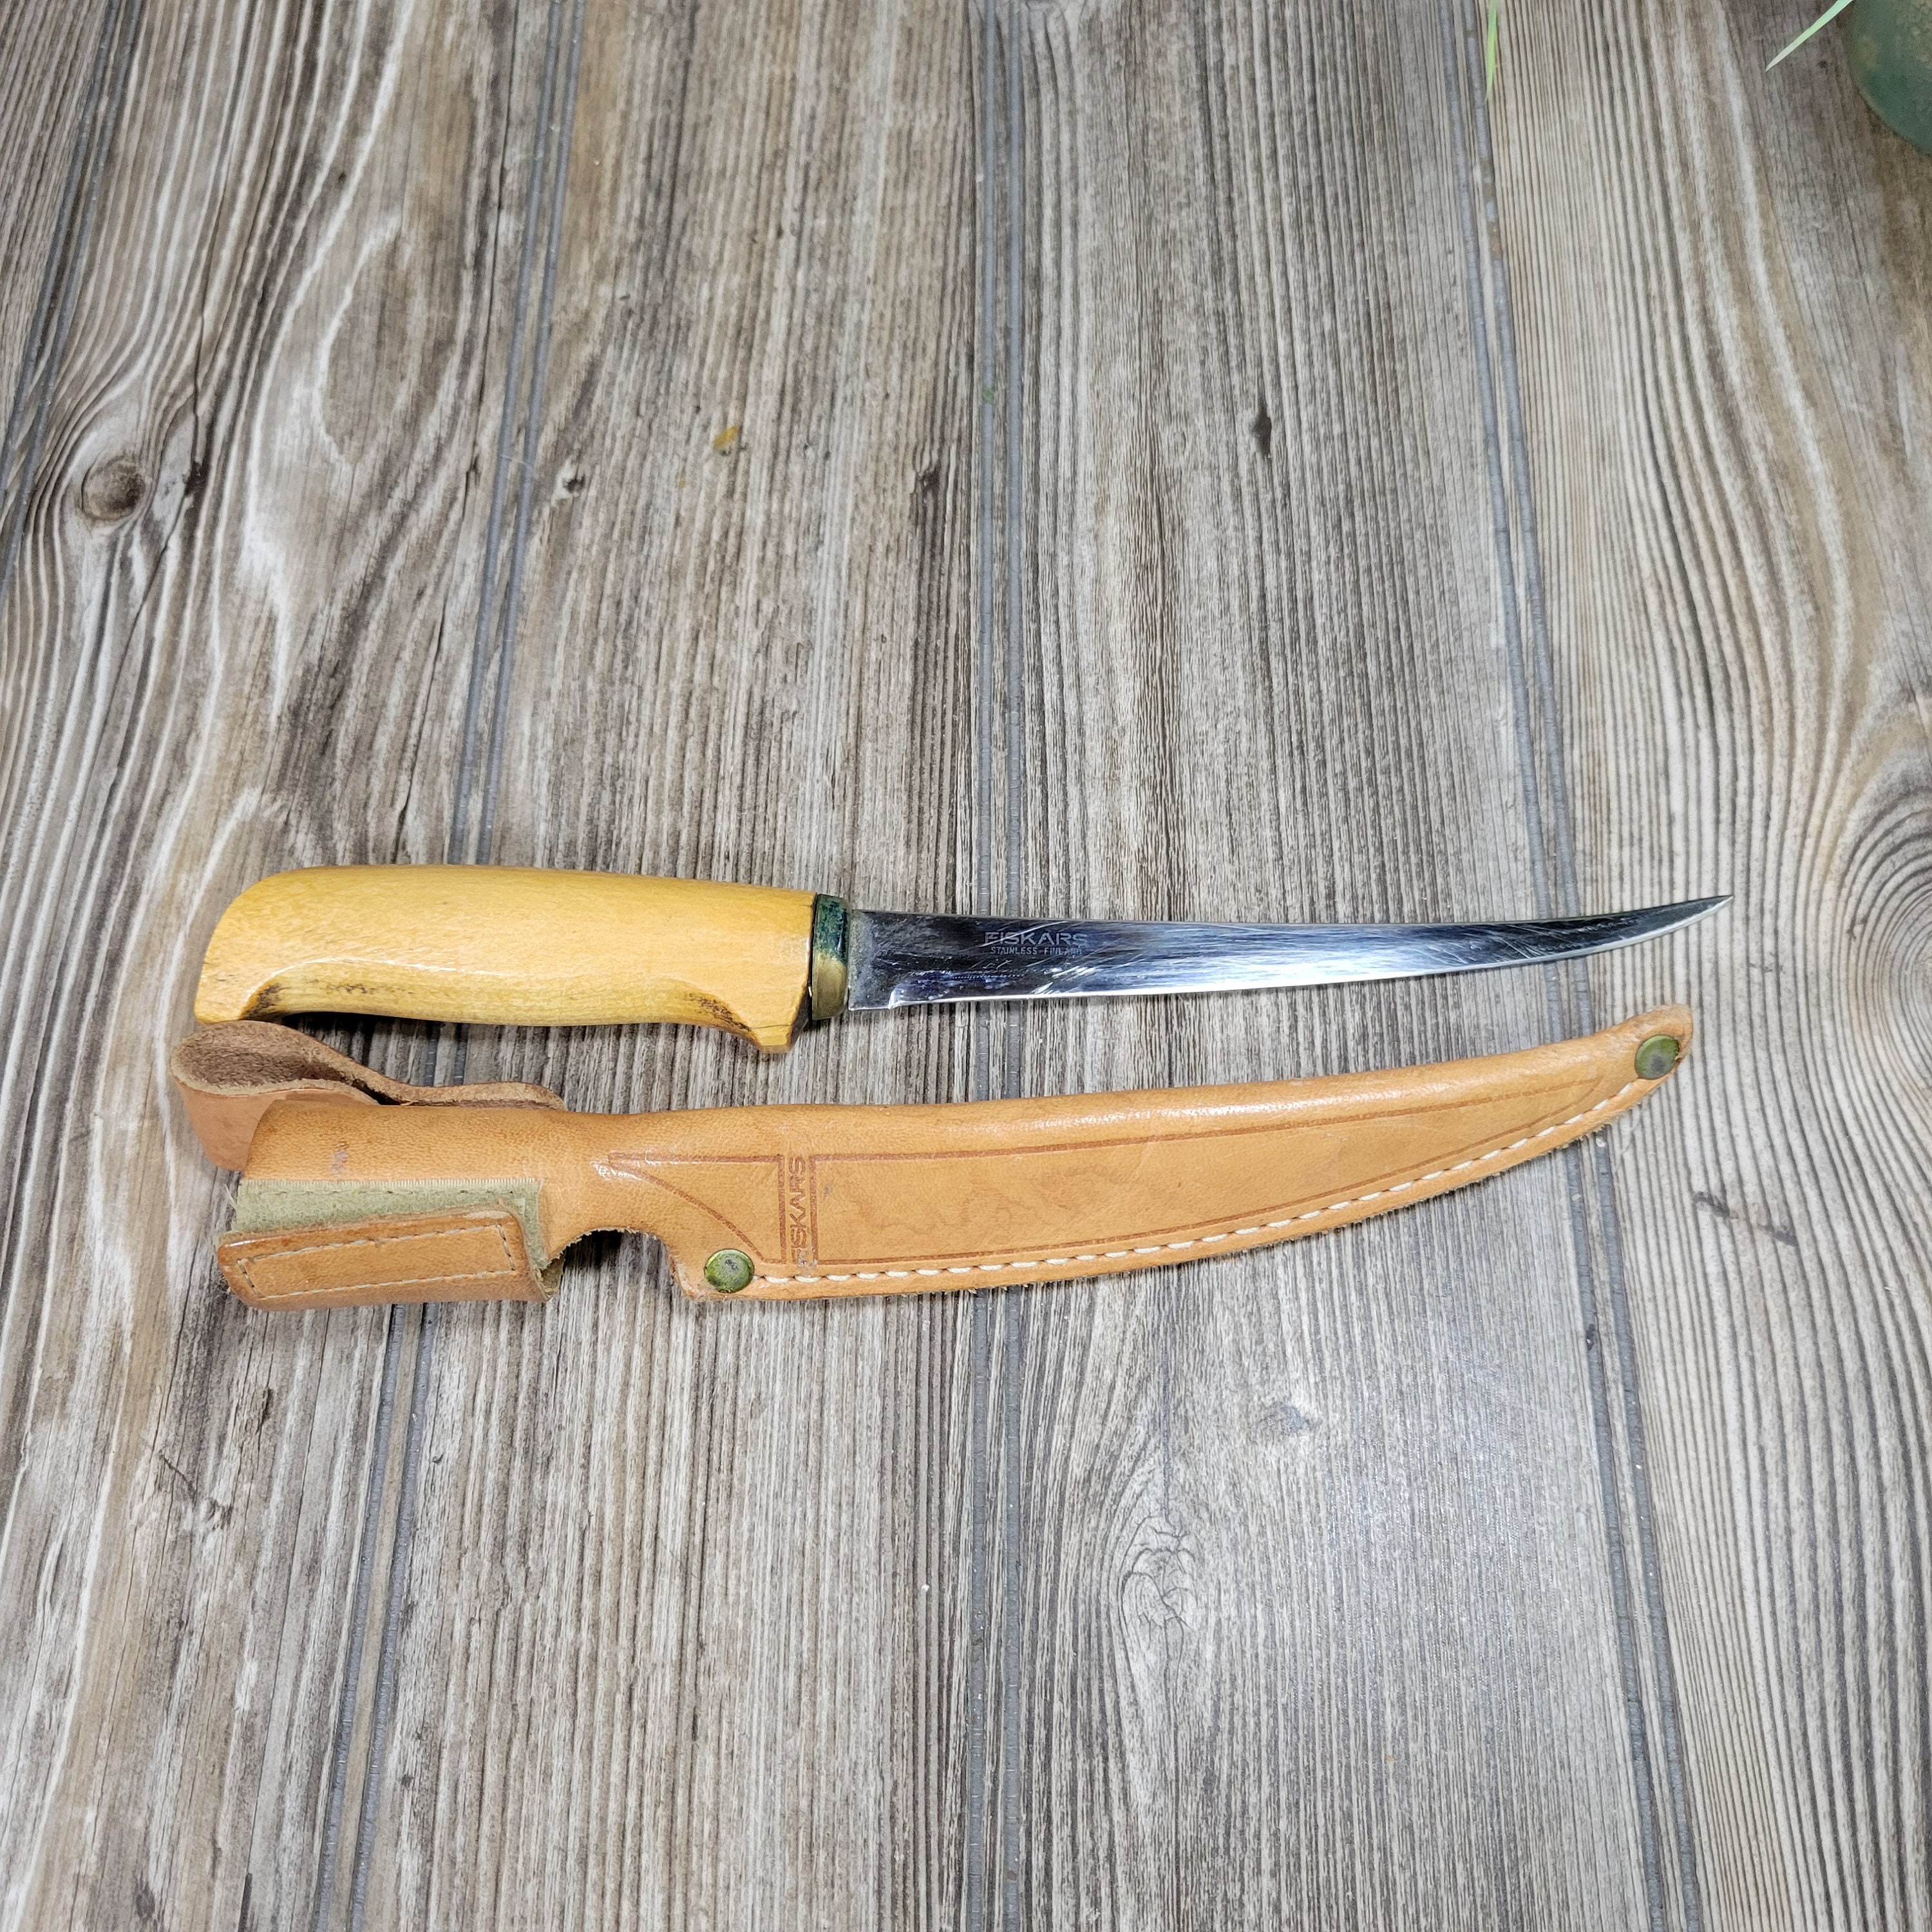 Vintage 1960s Normark Stainless Steel Fillet Knife from Fiskars with  Original Sheath Made in Finland